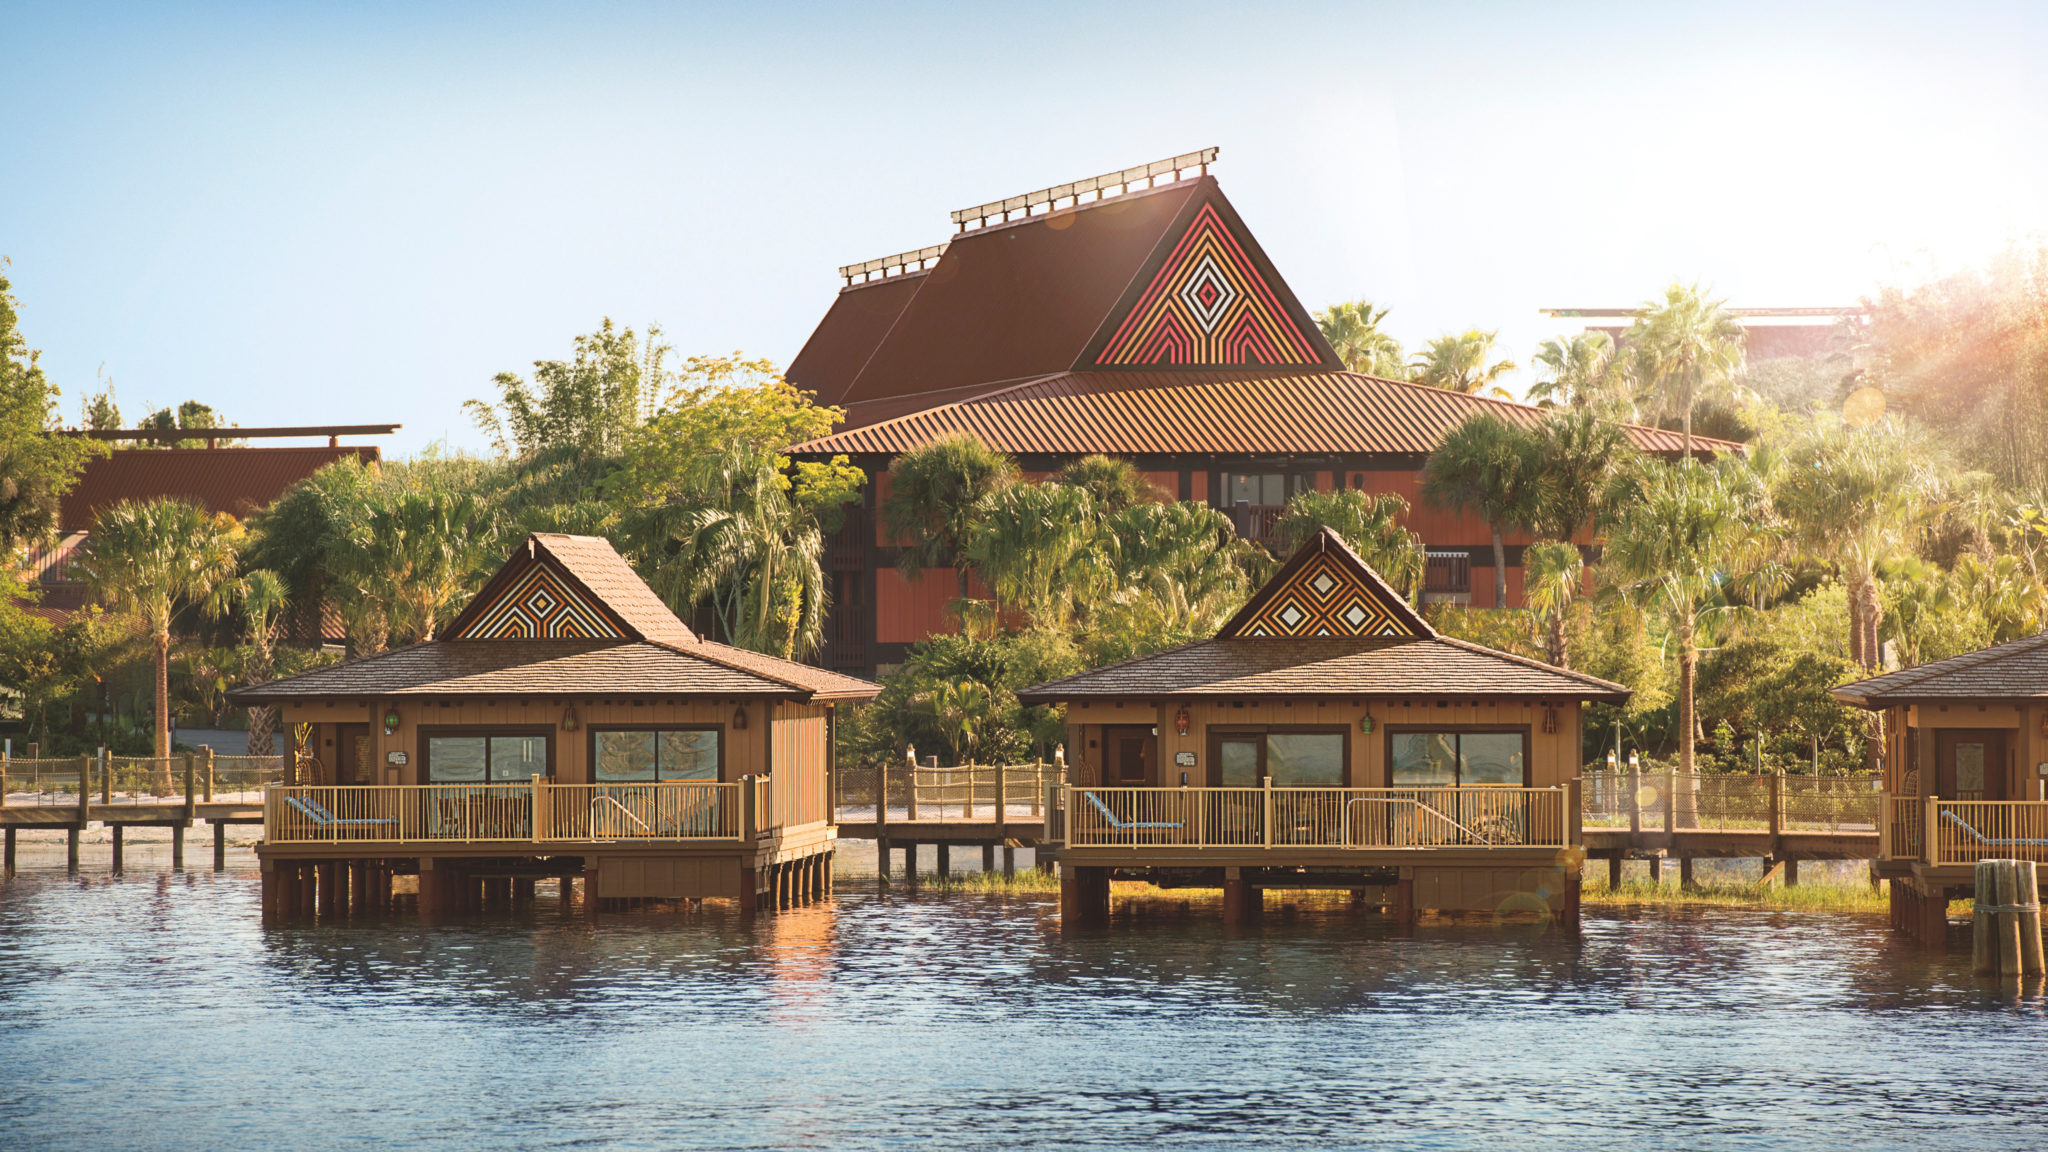 Air conditioner issues at Disney’s Polynesian Bungalows